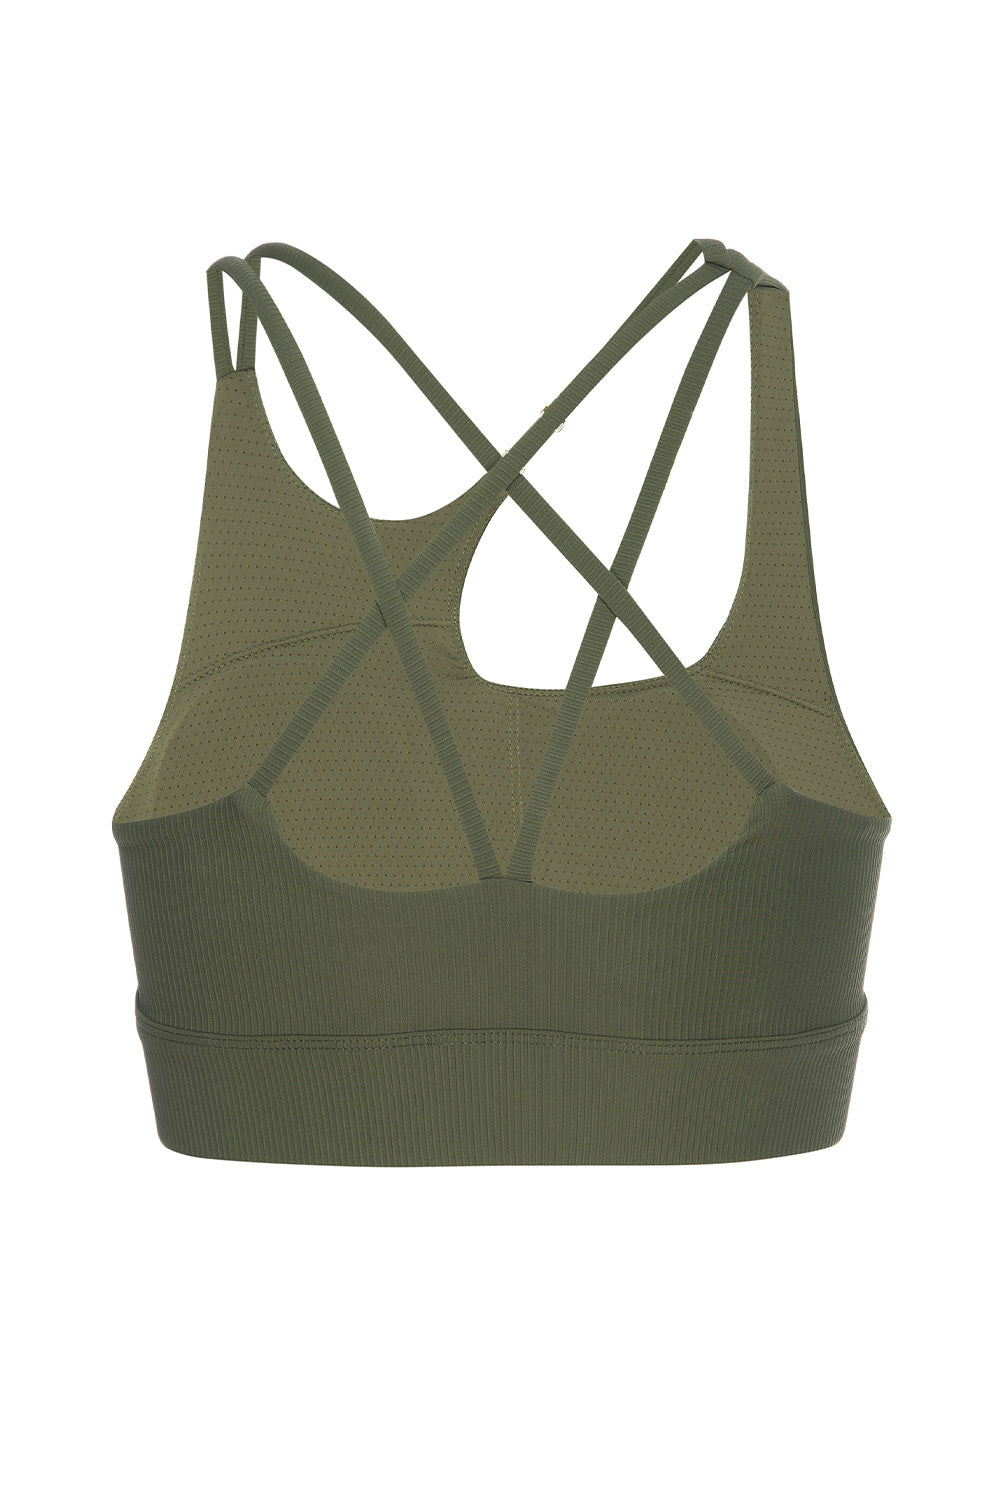 Melrose army ribbed bra top on a white background back view. 